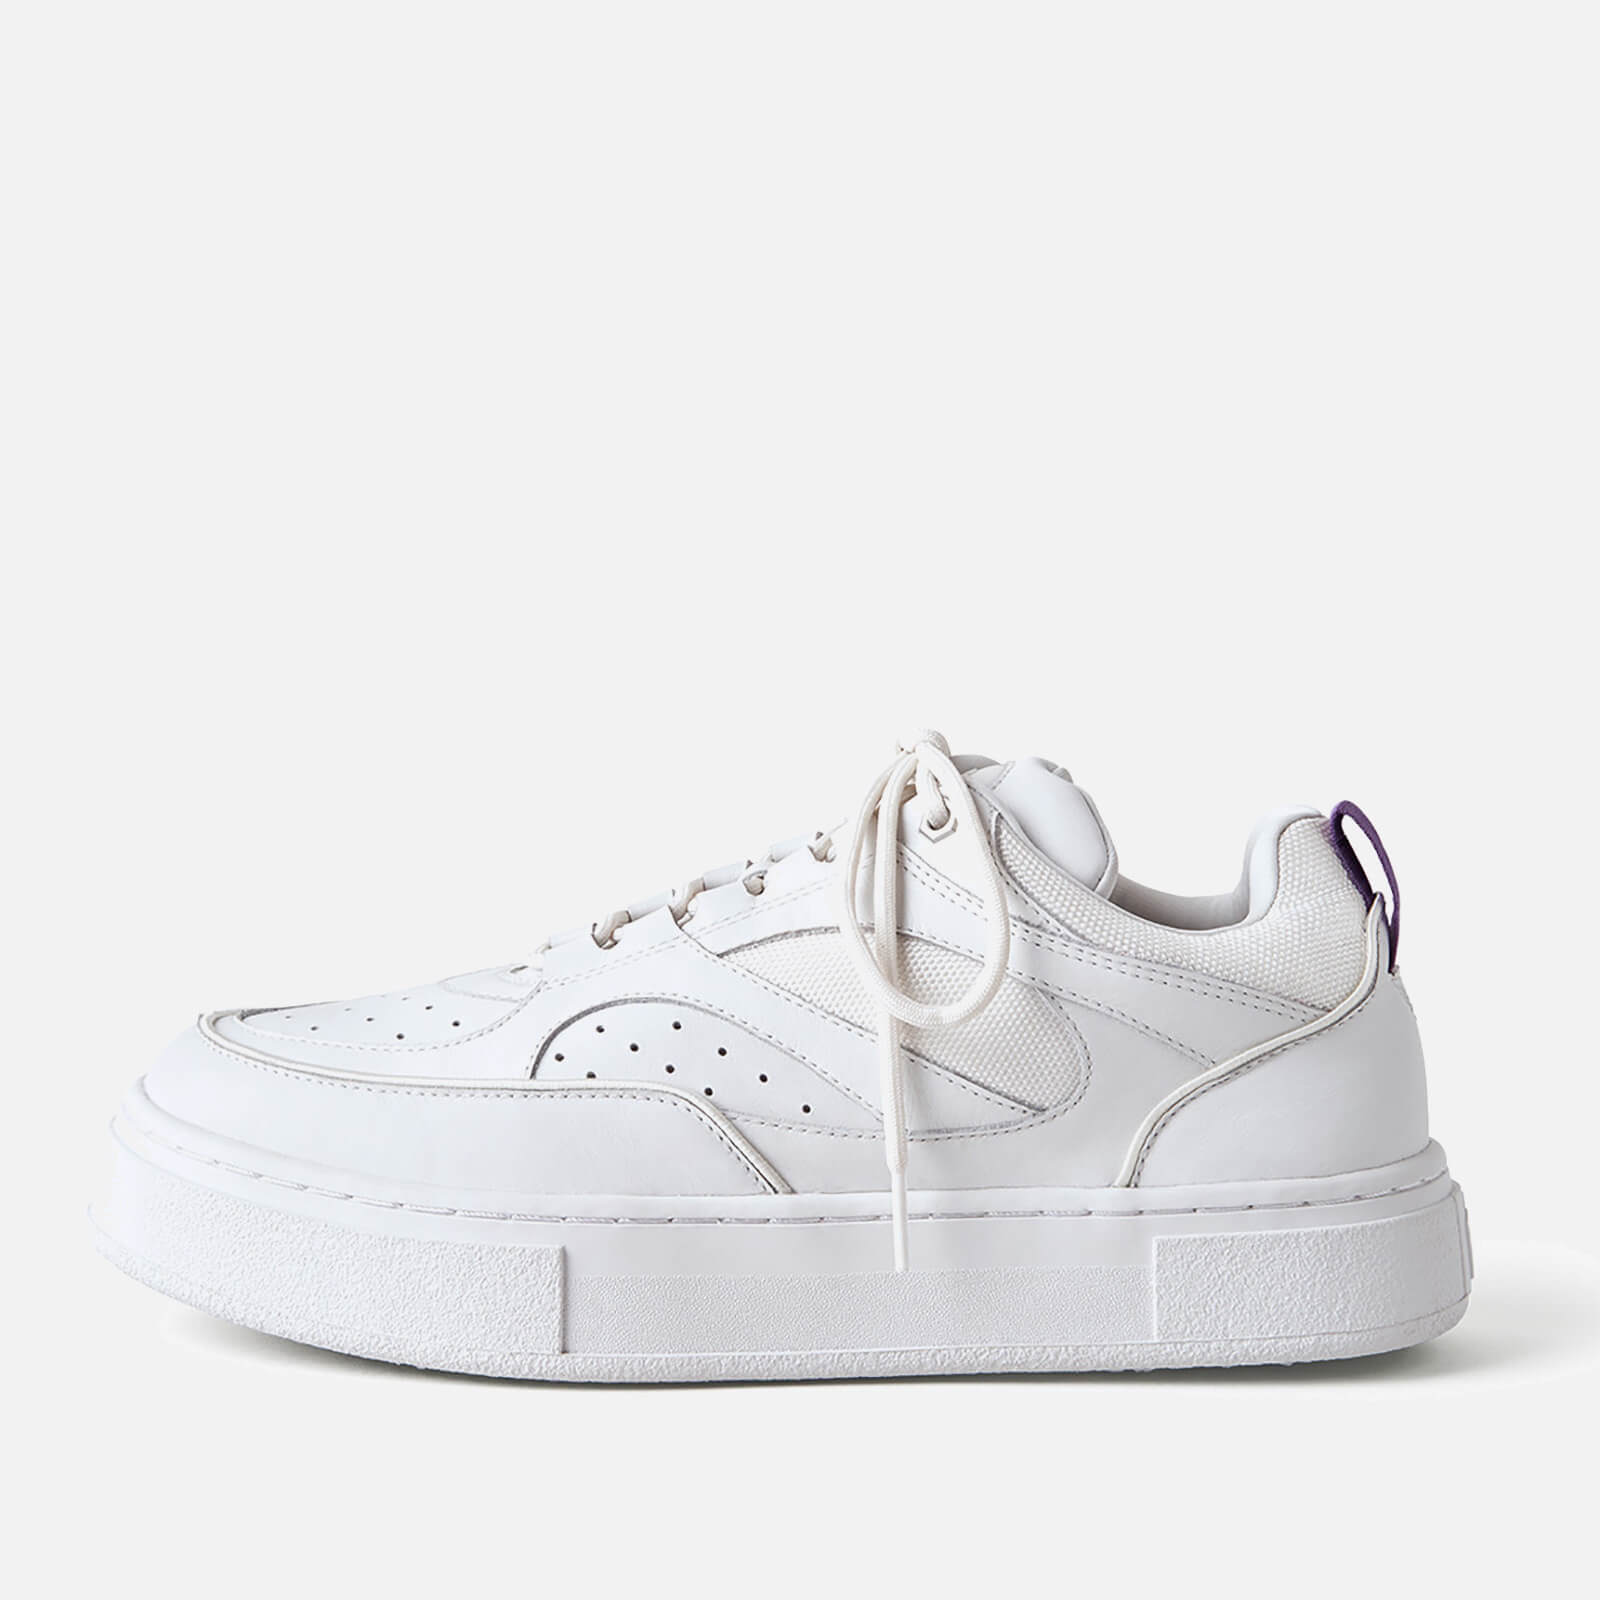 Eytys Sidney Leather Trainers - White - UK 3.5